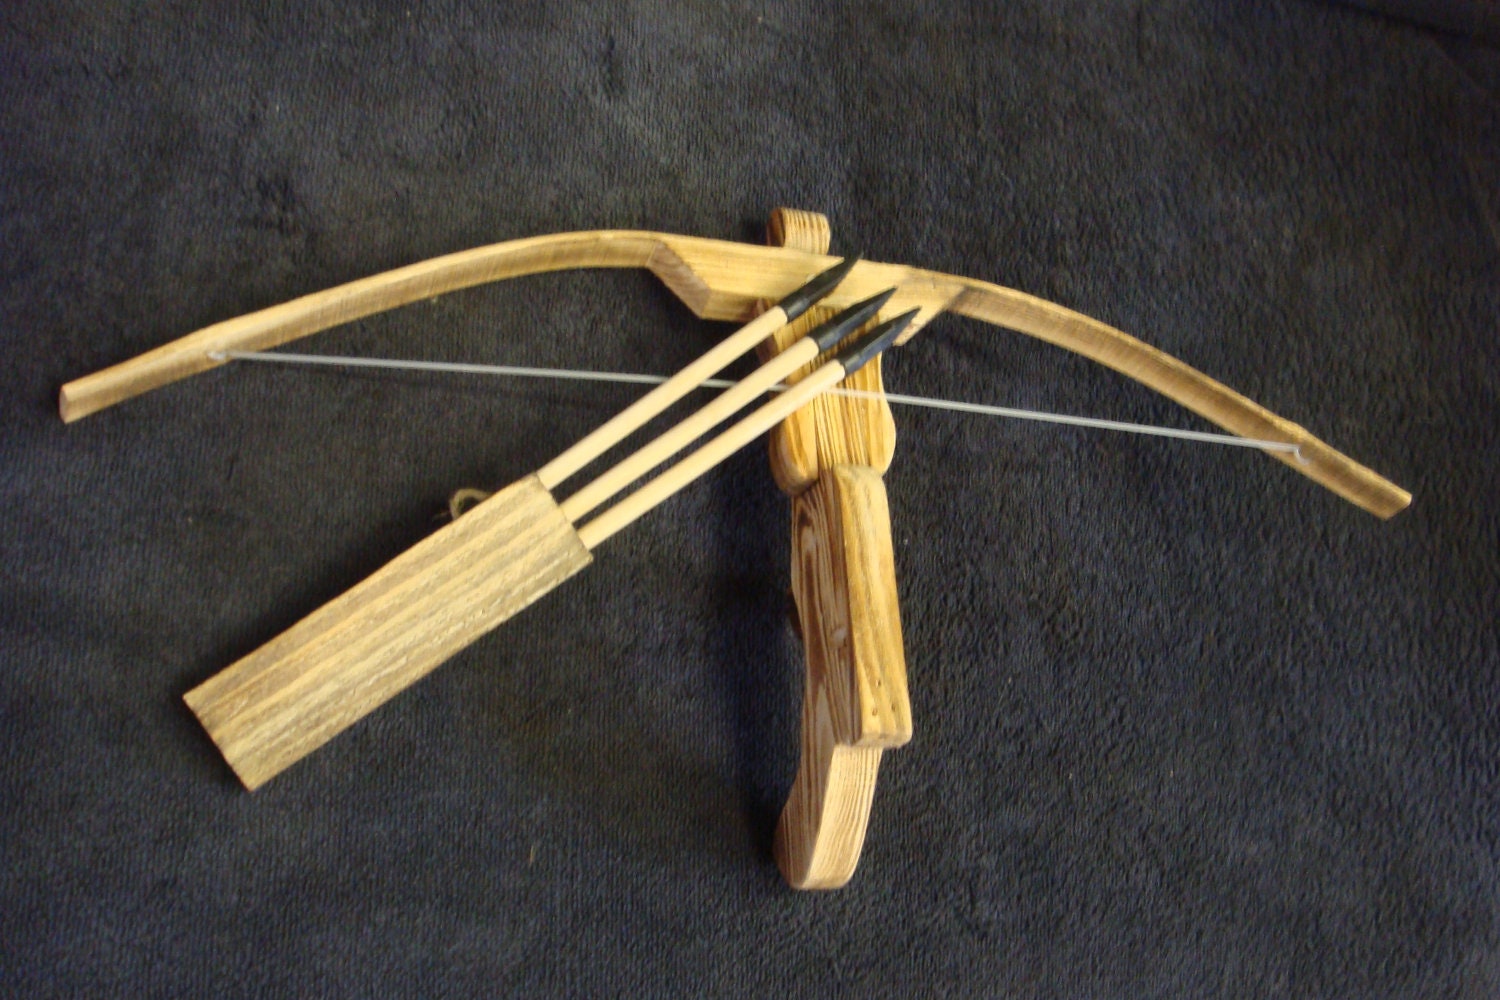 CROSSBOW & 3 ARROWS SETTRADITIONAL WOODEN CHILDRENS TOY ROLE PLAY 40CM AGE 6 